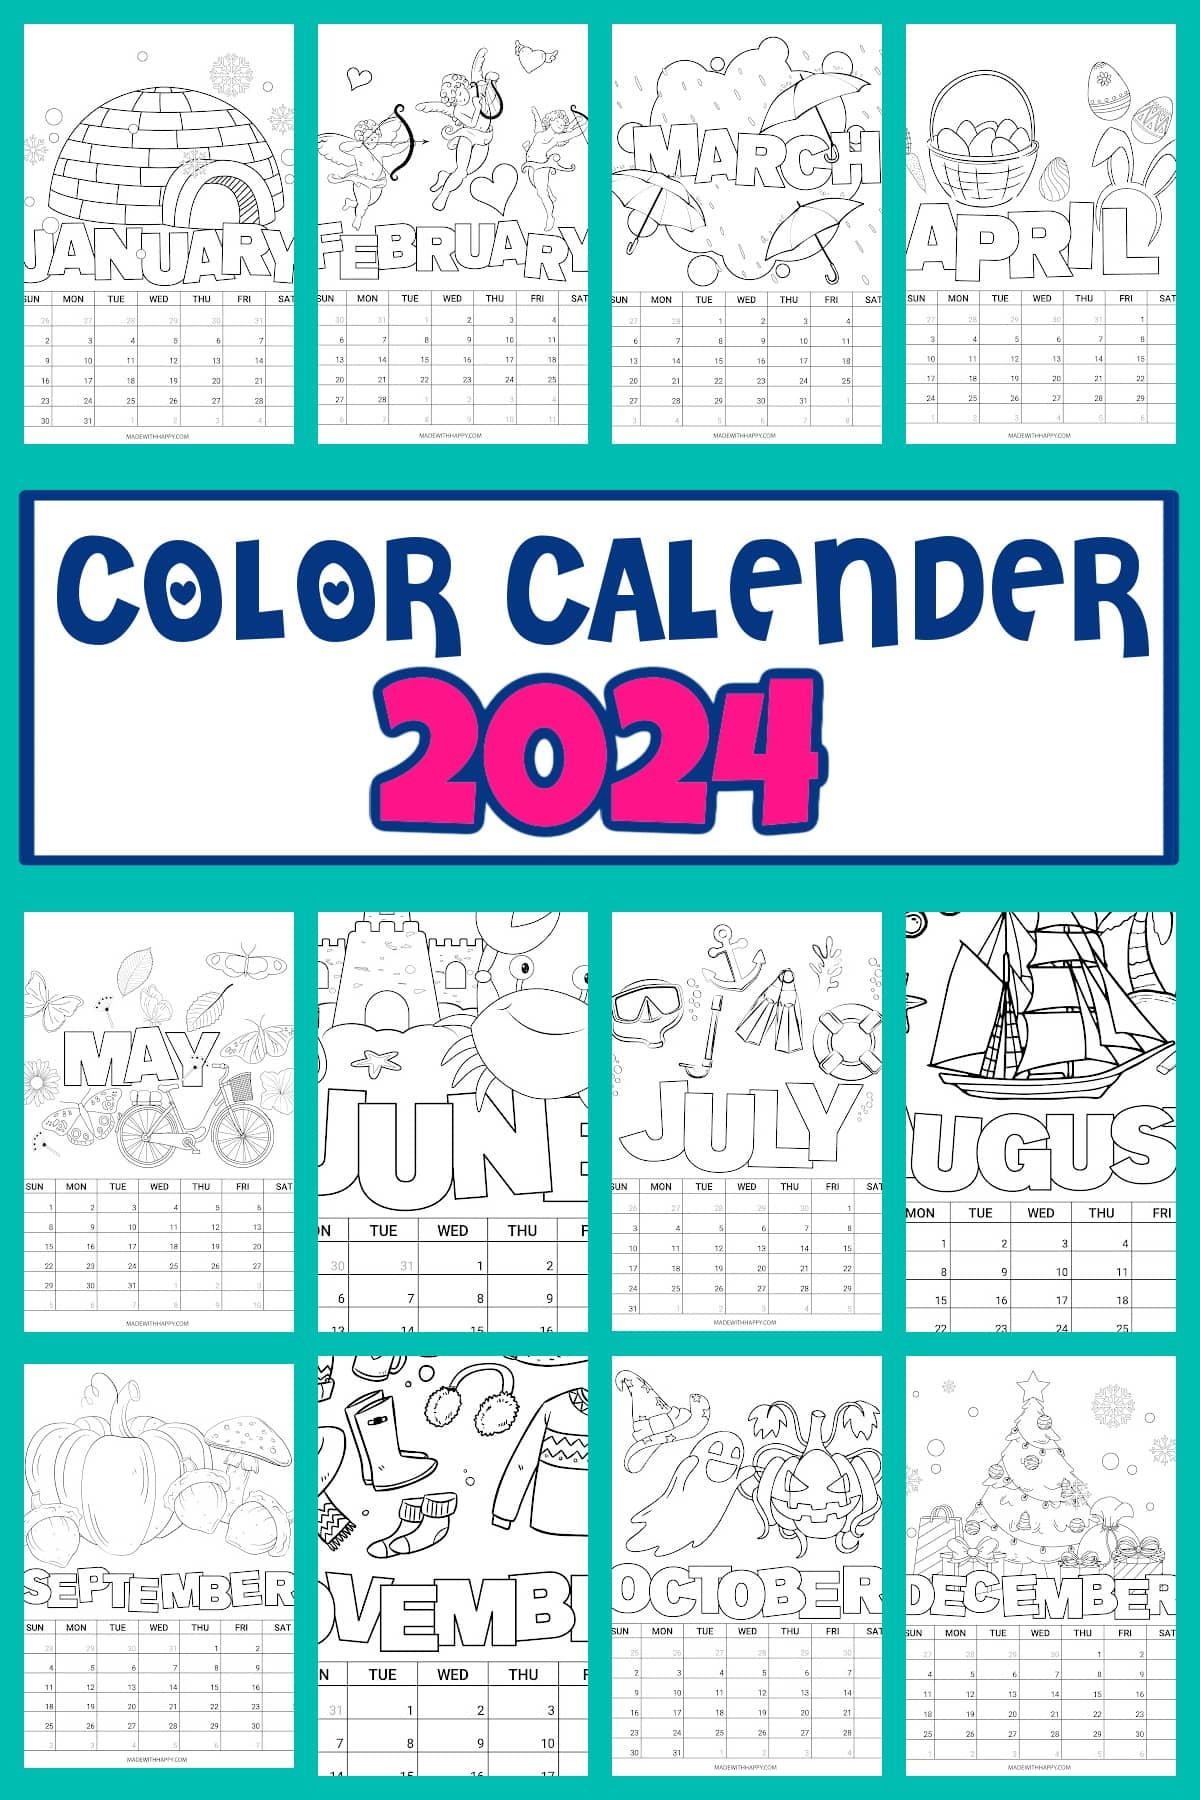 2024 Printable Coloring Calendar For Kids - Made With Happy intended for Free Printable Calendar 2024 Kindergarten